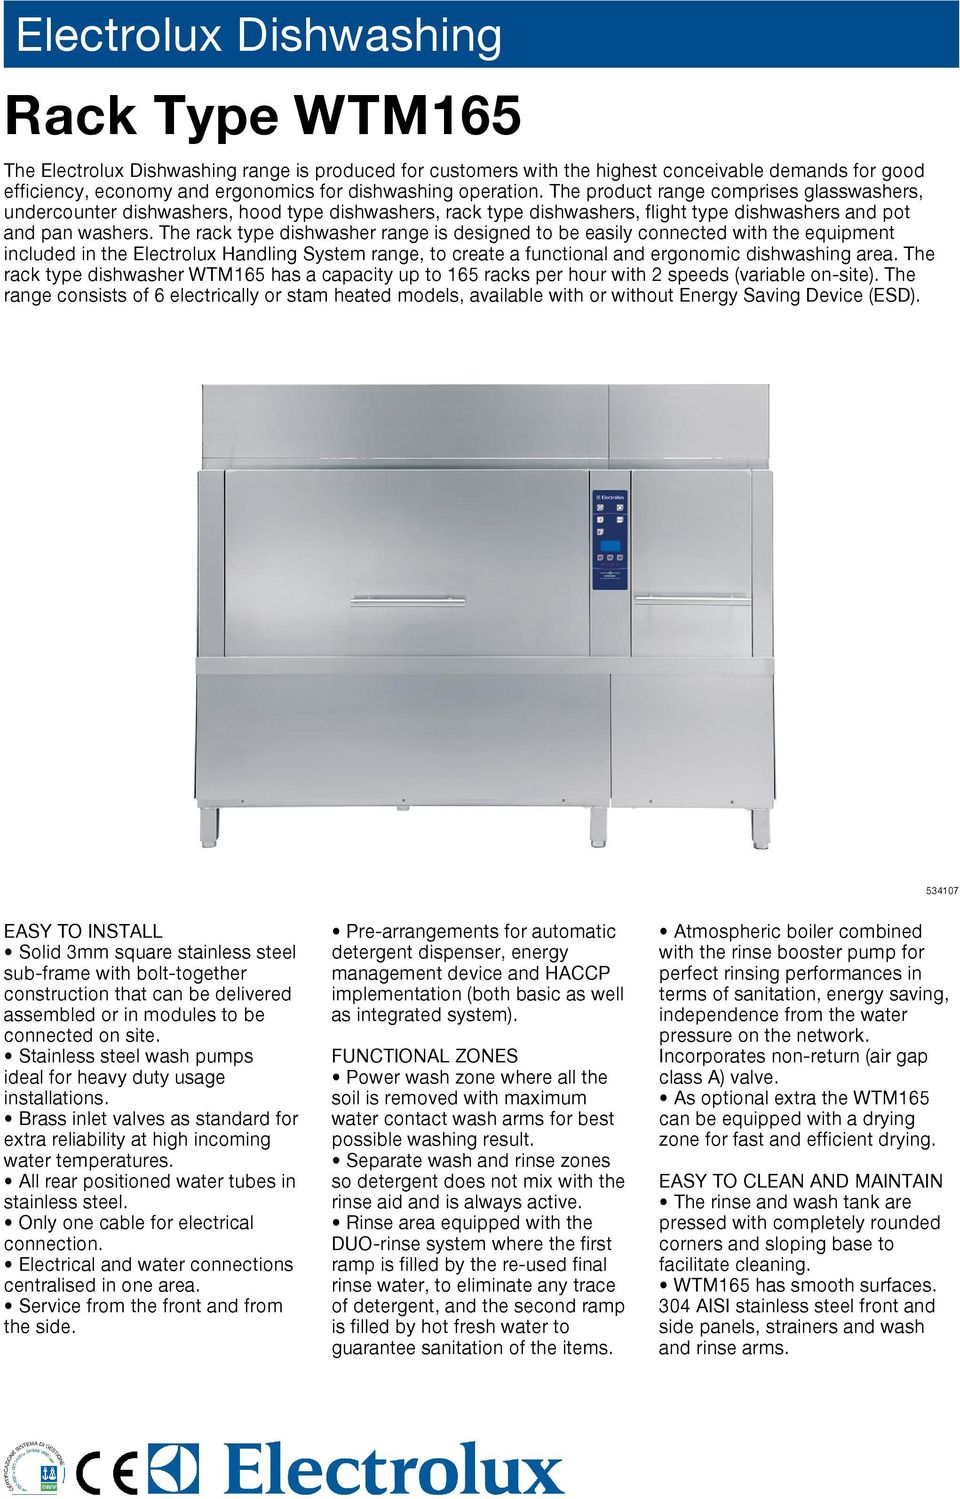 The rack type dishwasher range is designed to be easily connected with the equipment included in the Electrolux Handling System range, to create a functional and ergonomic dishwashing area.